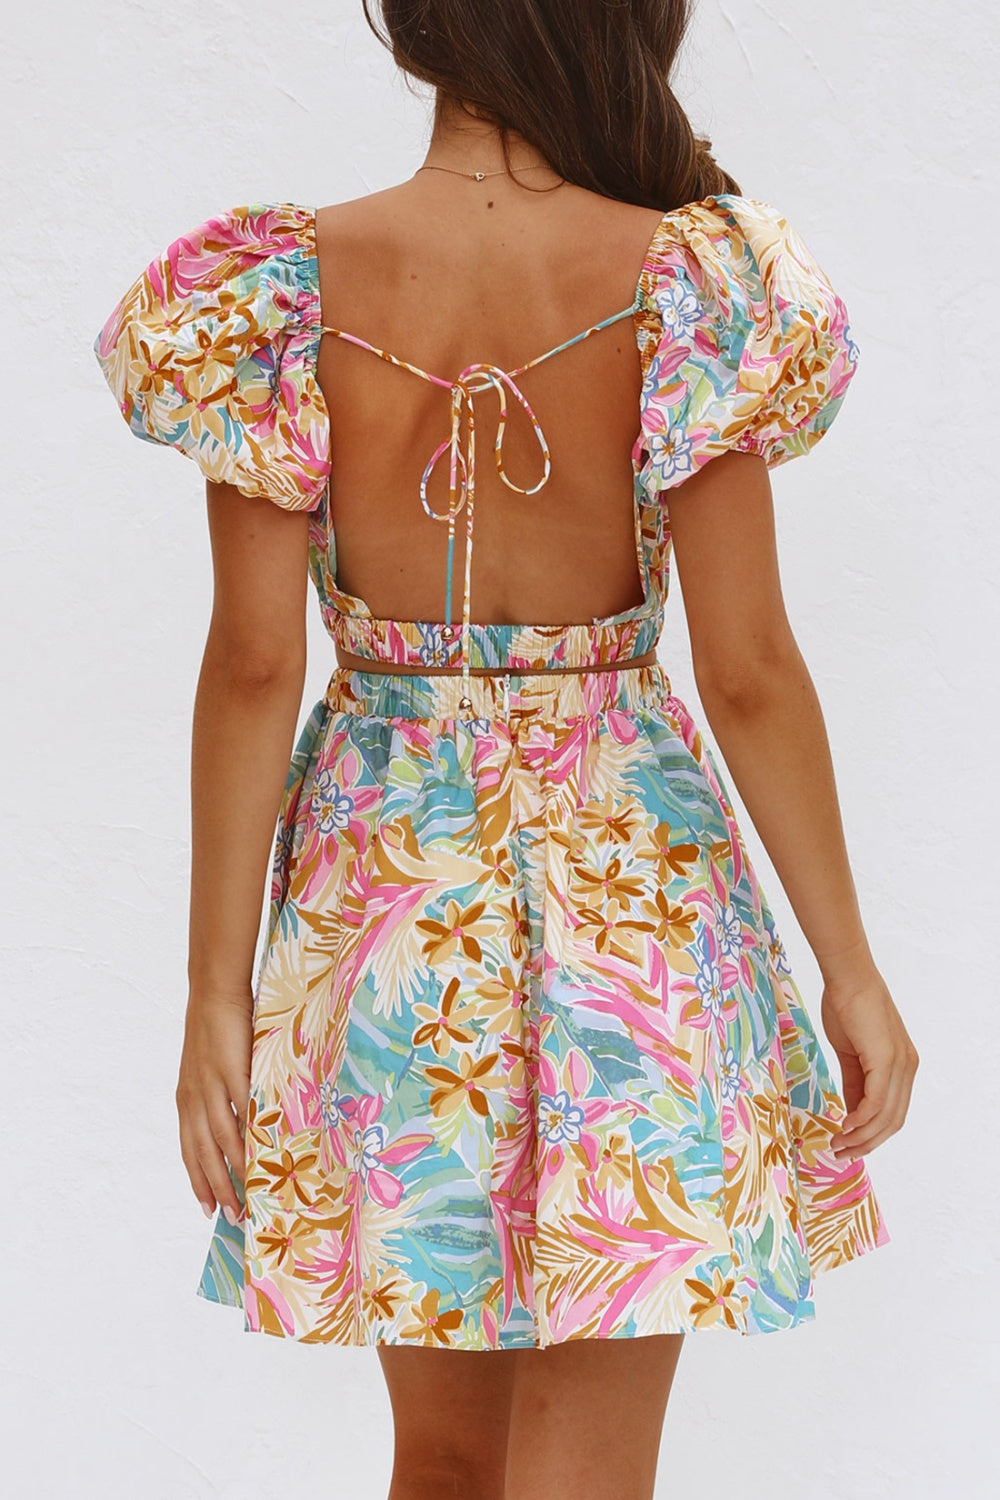 Floral Short Sleeve Backless Mini Dress for Beach Wedding Guests